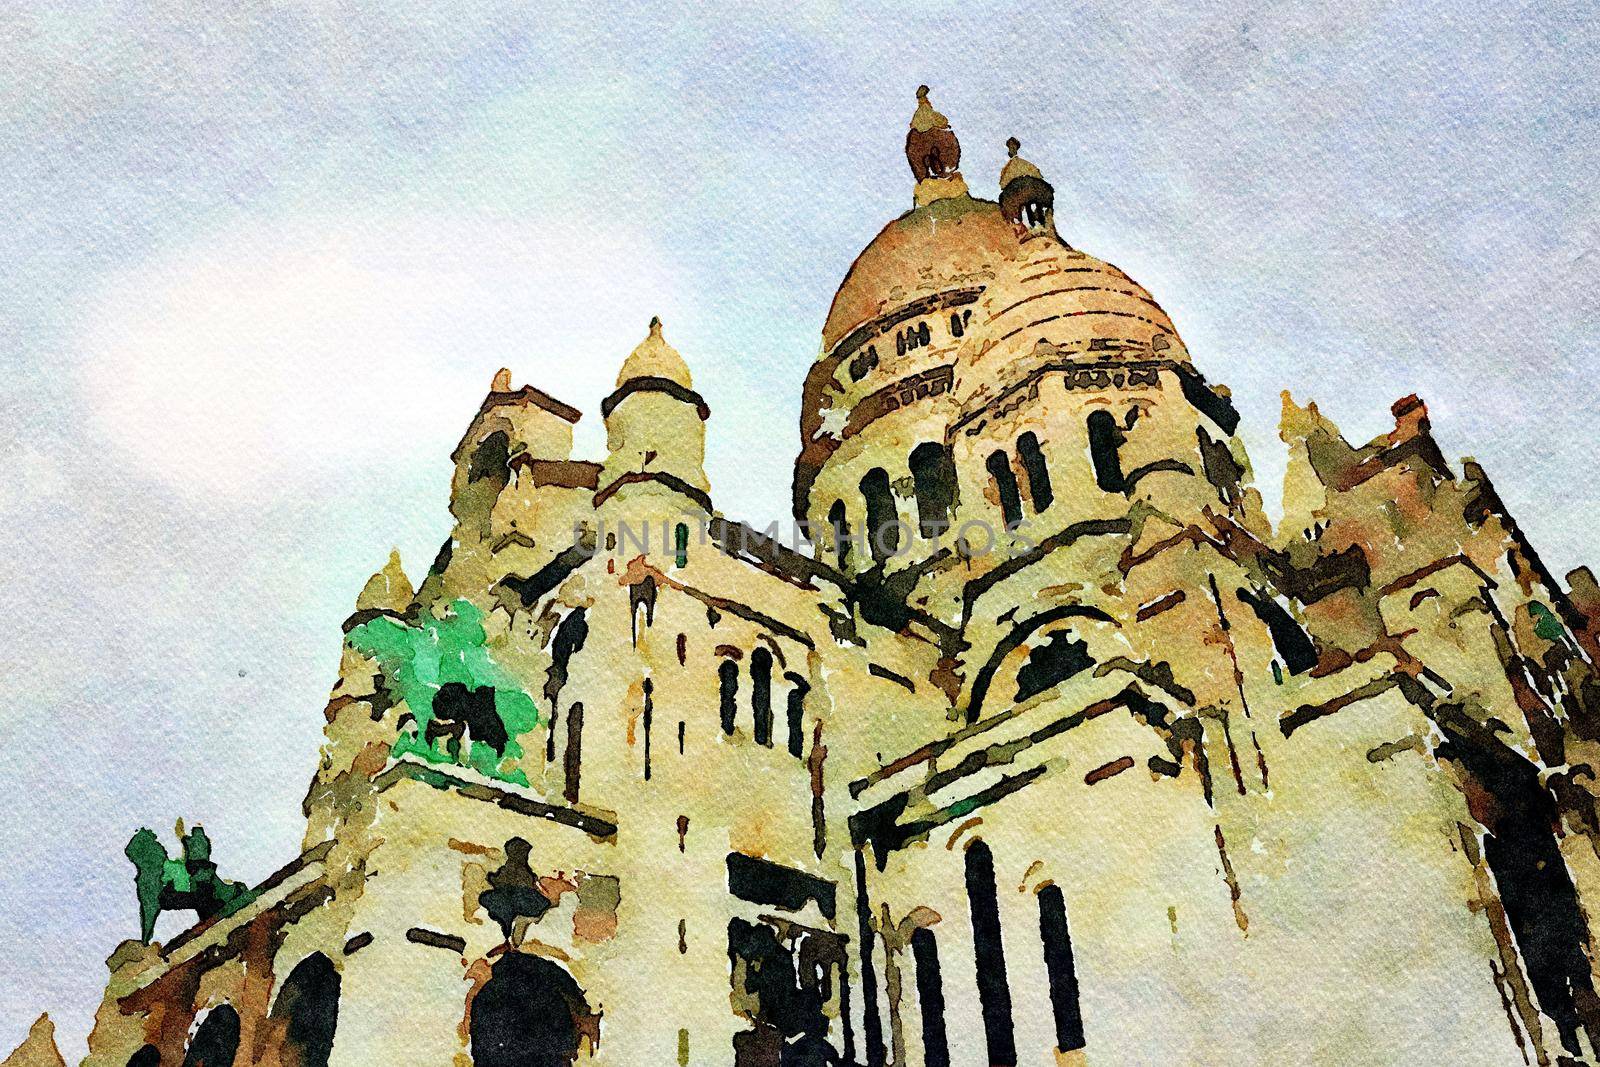 Watercolor representing a glimpse of the church of the Sacre Coeur in the Montmartre district of Paris in the autumn